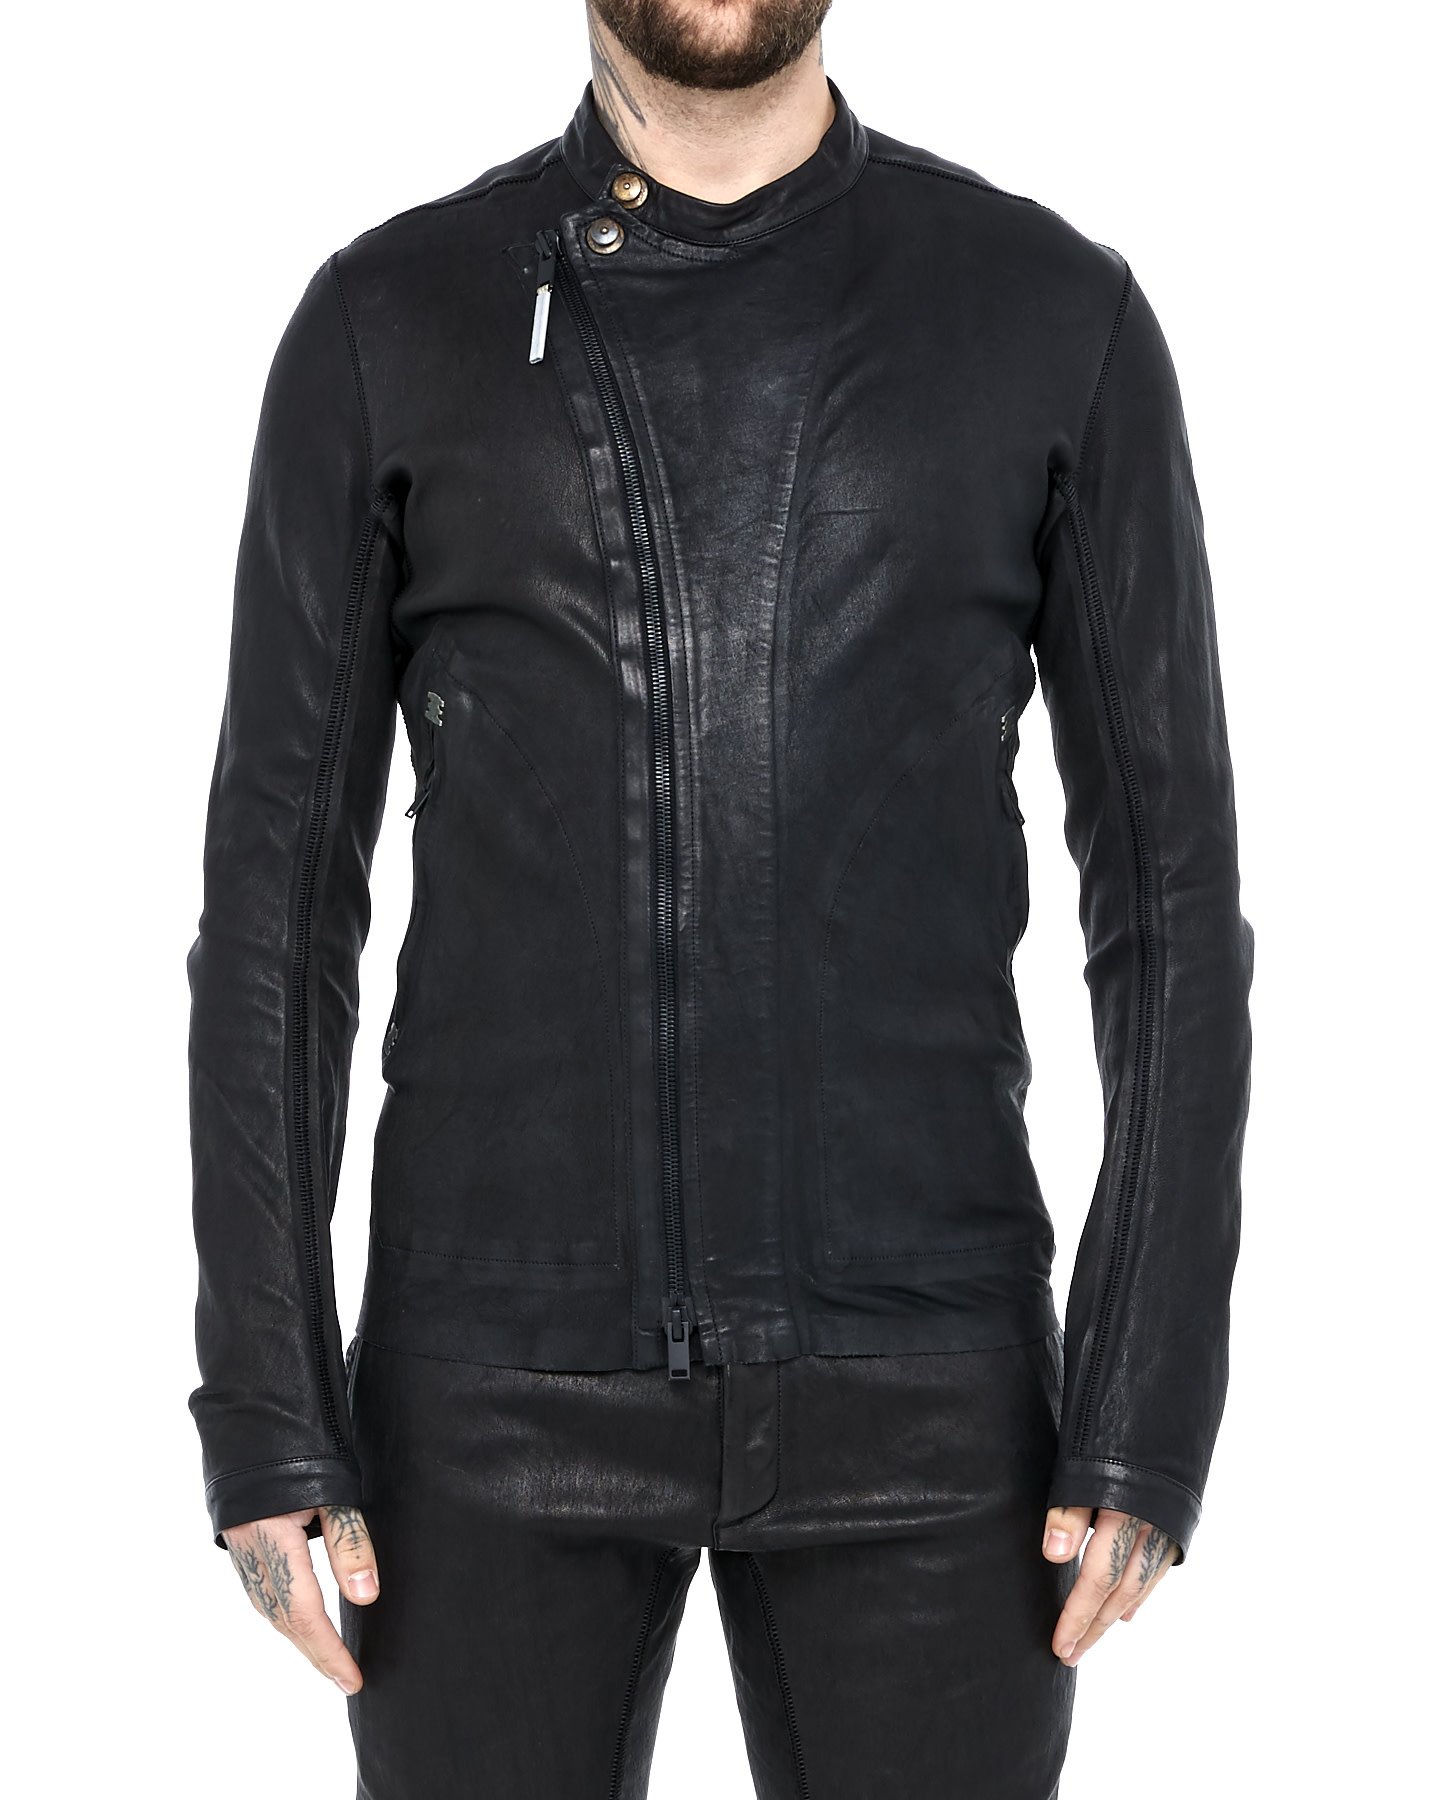 BUTE NEO STRETCH LEATHER JACKET